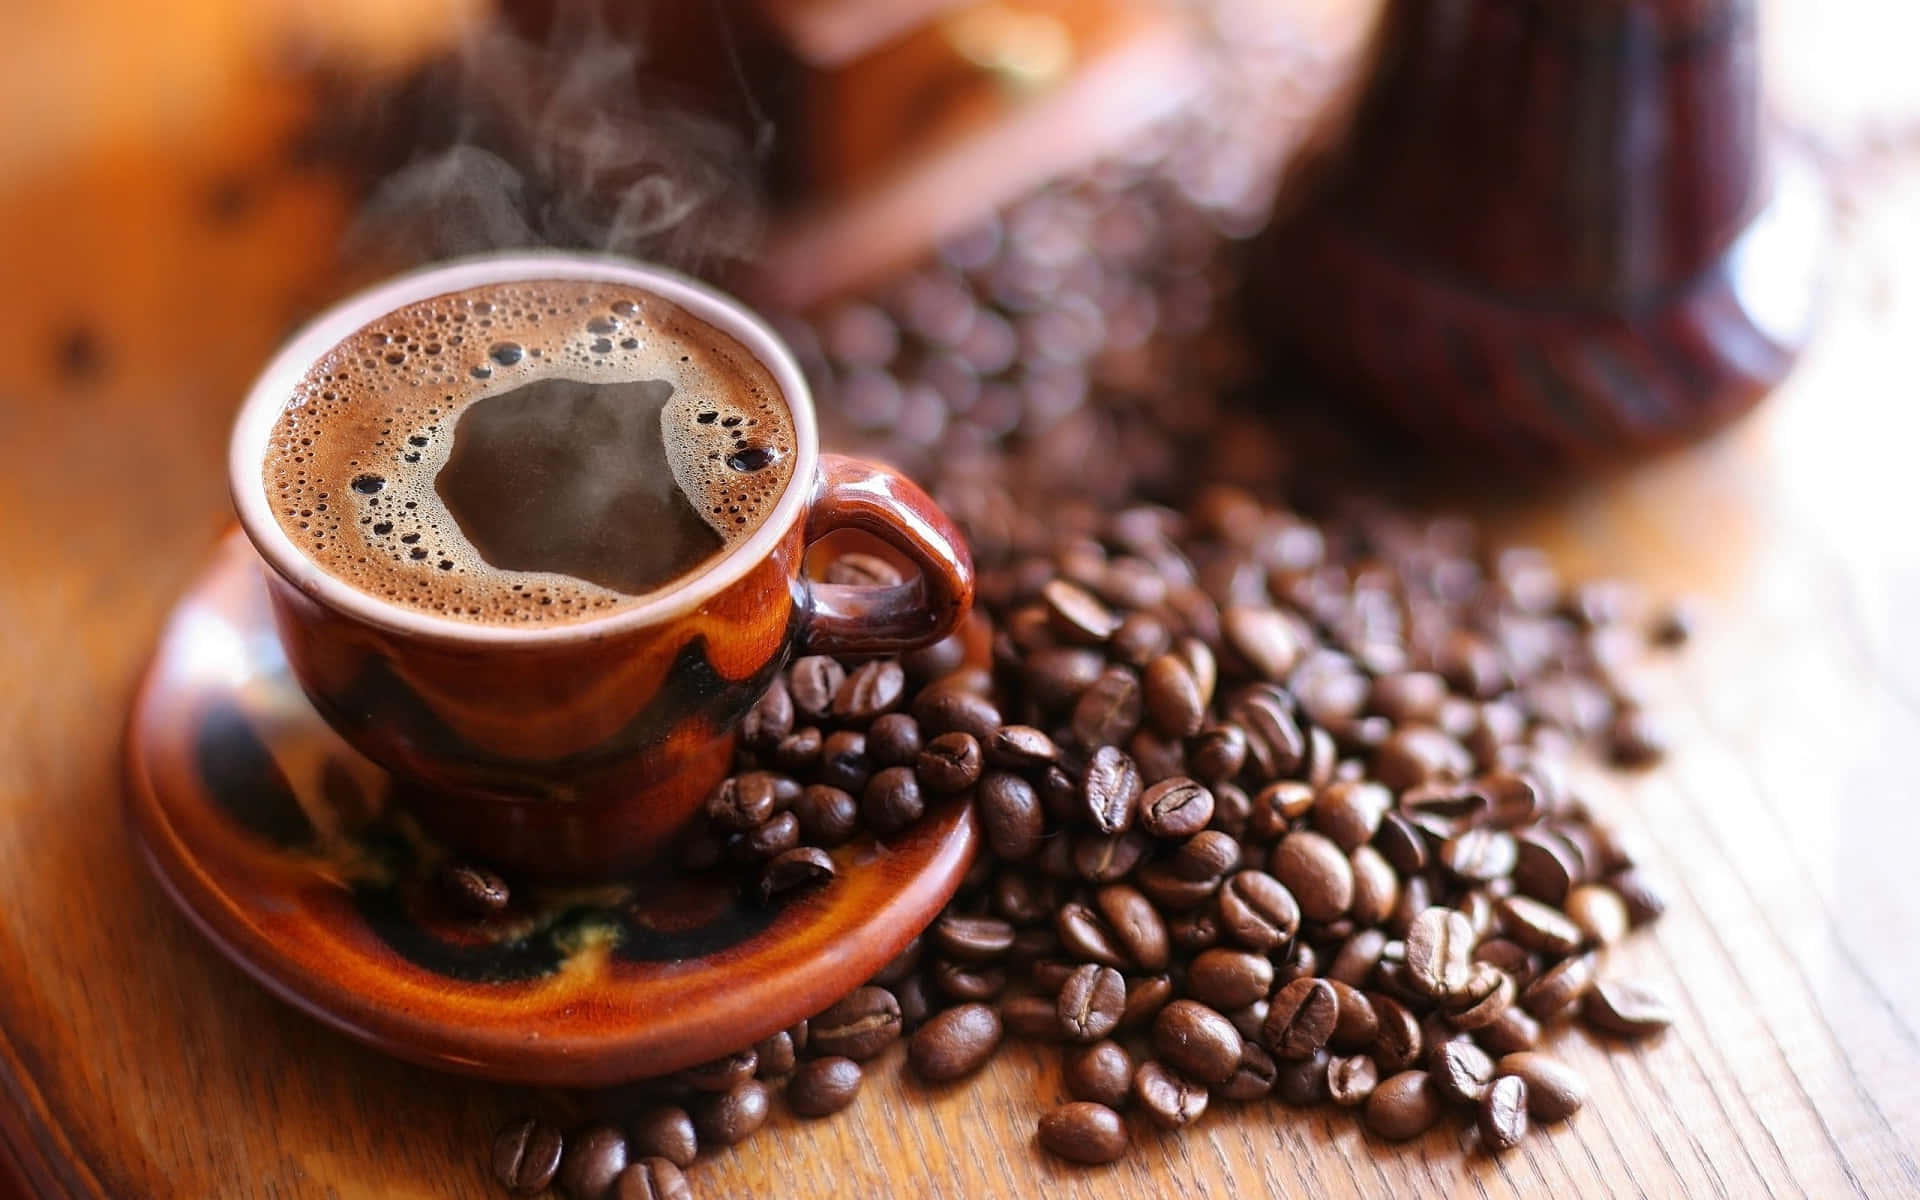 "Start your day right with a steaming hot cup of morning coffee"